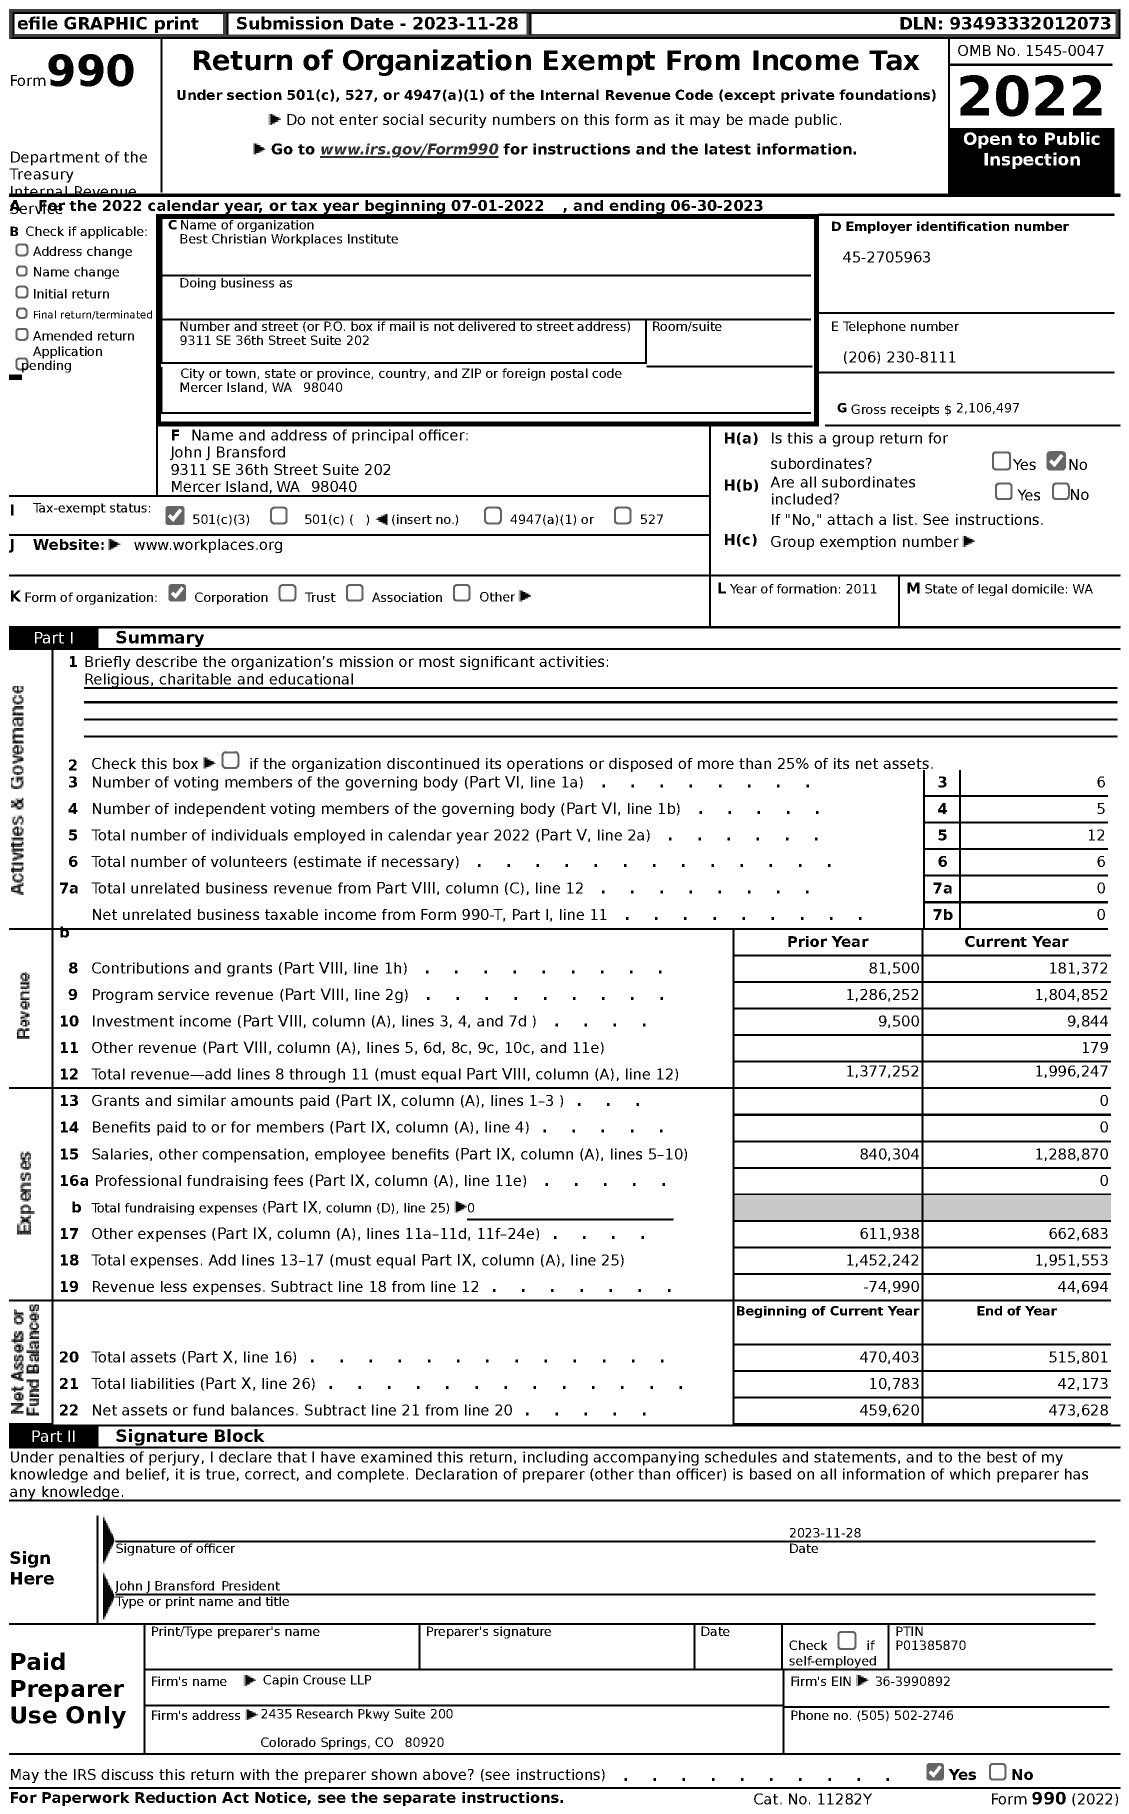 Image of first page of 2022 Form 990 for Best Christian Workplaces Institute